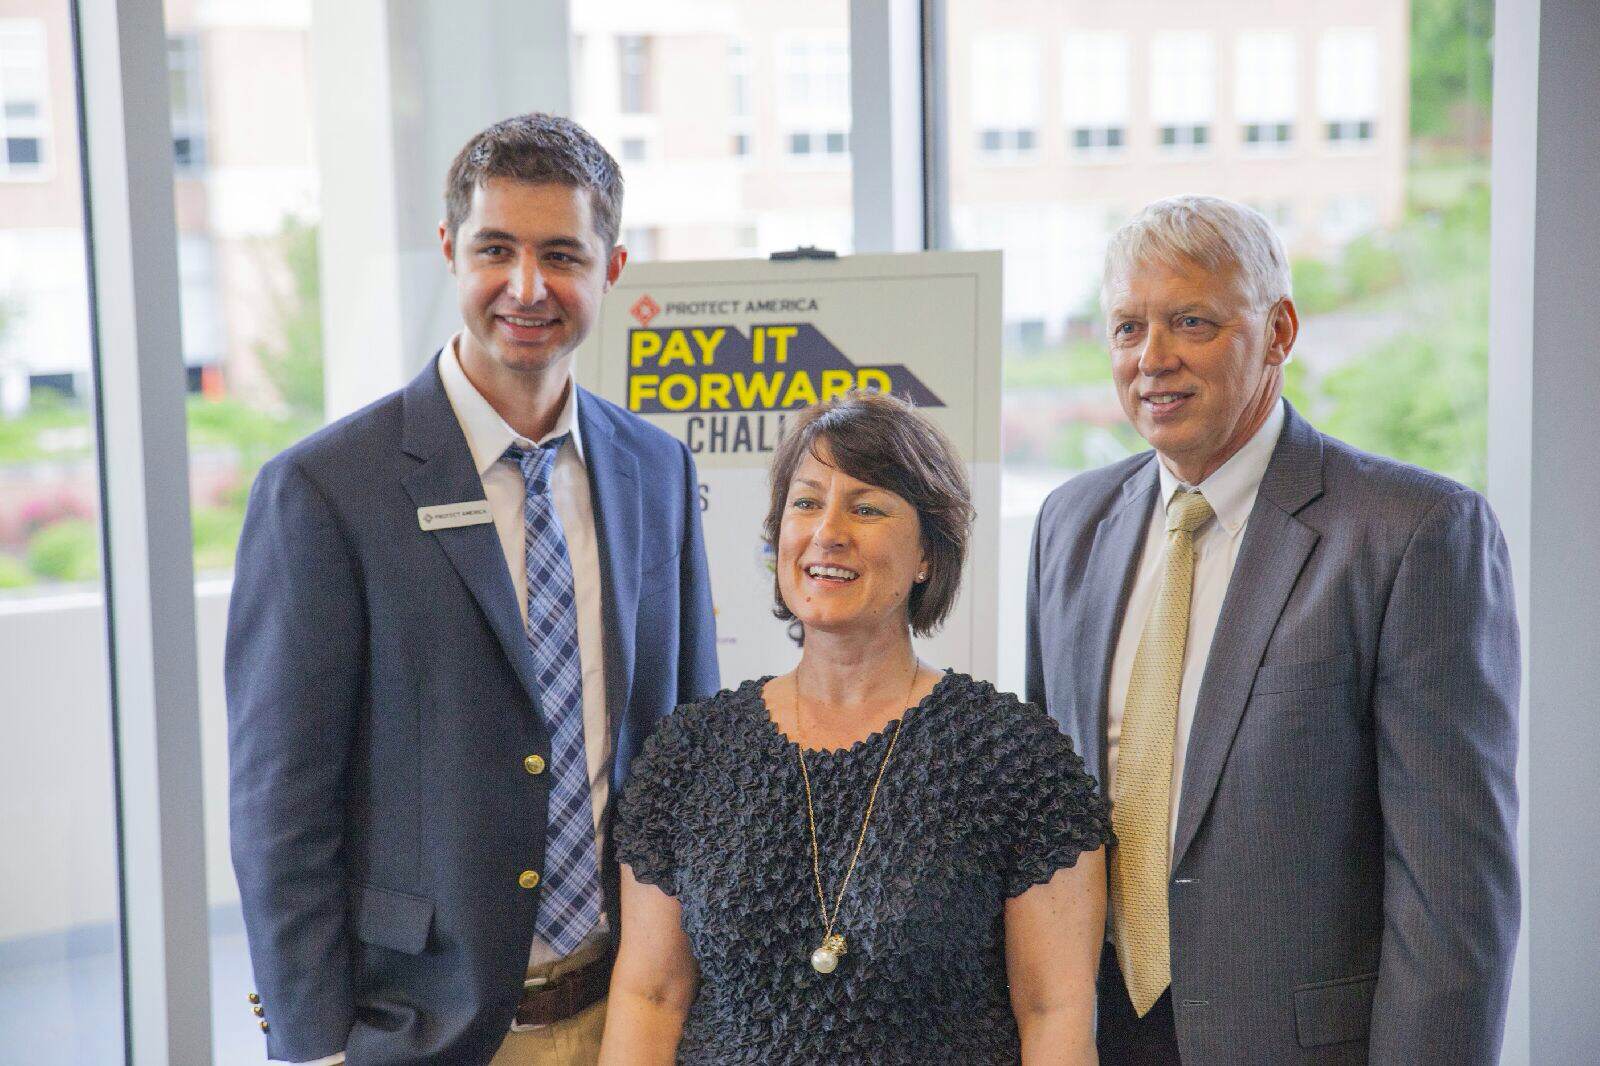 University of South Alabama President Dr. Tony G. Waldrop, Protect America Corporate Communications Manager Tim Krebs and American Red Cross Communications Officer Martha Duvall at the Pay It Forward